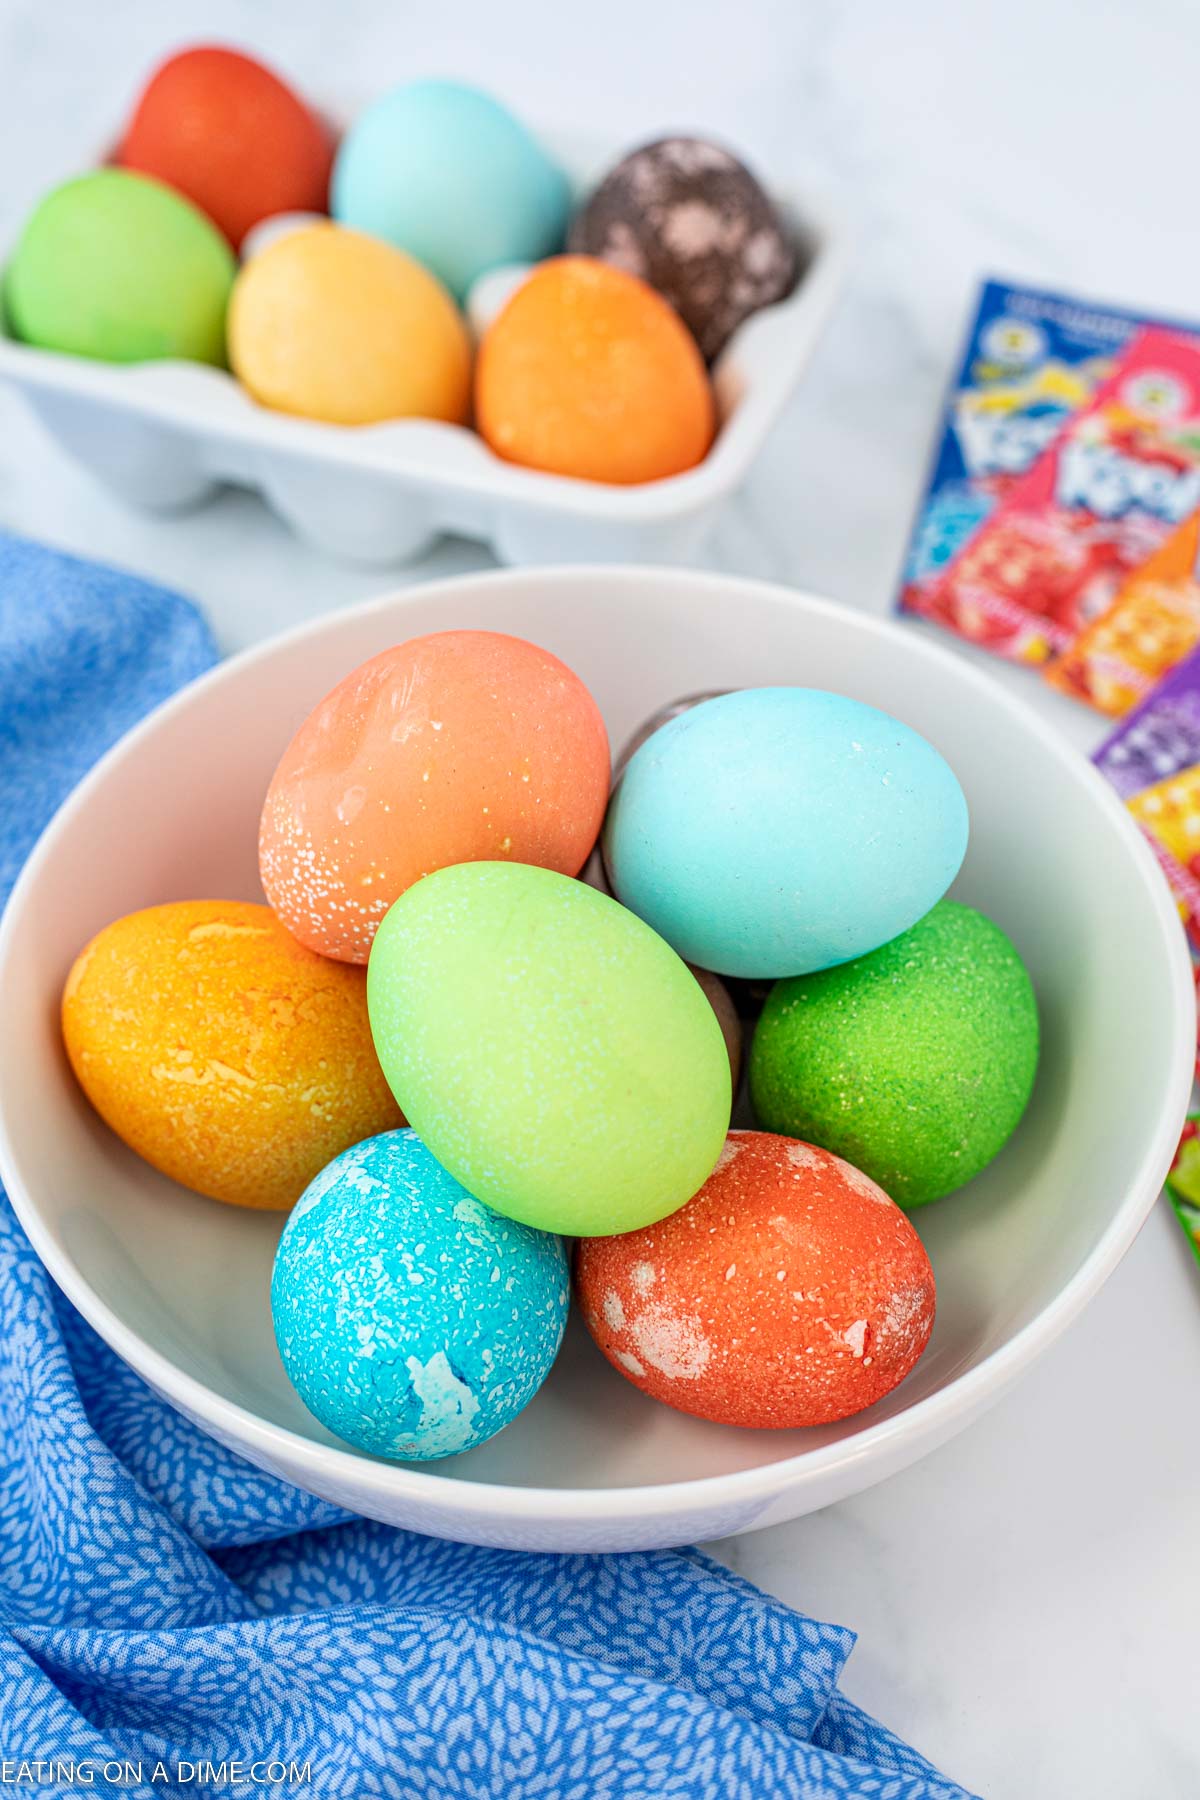 How to Dye Easter Eggs Without a Kit